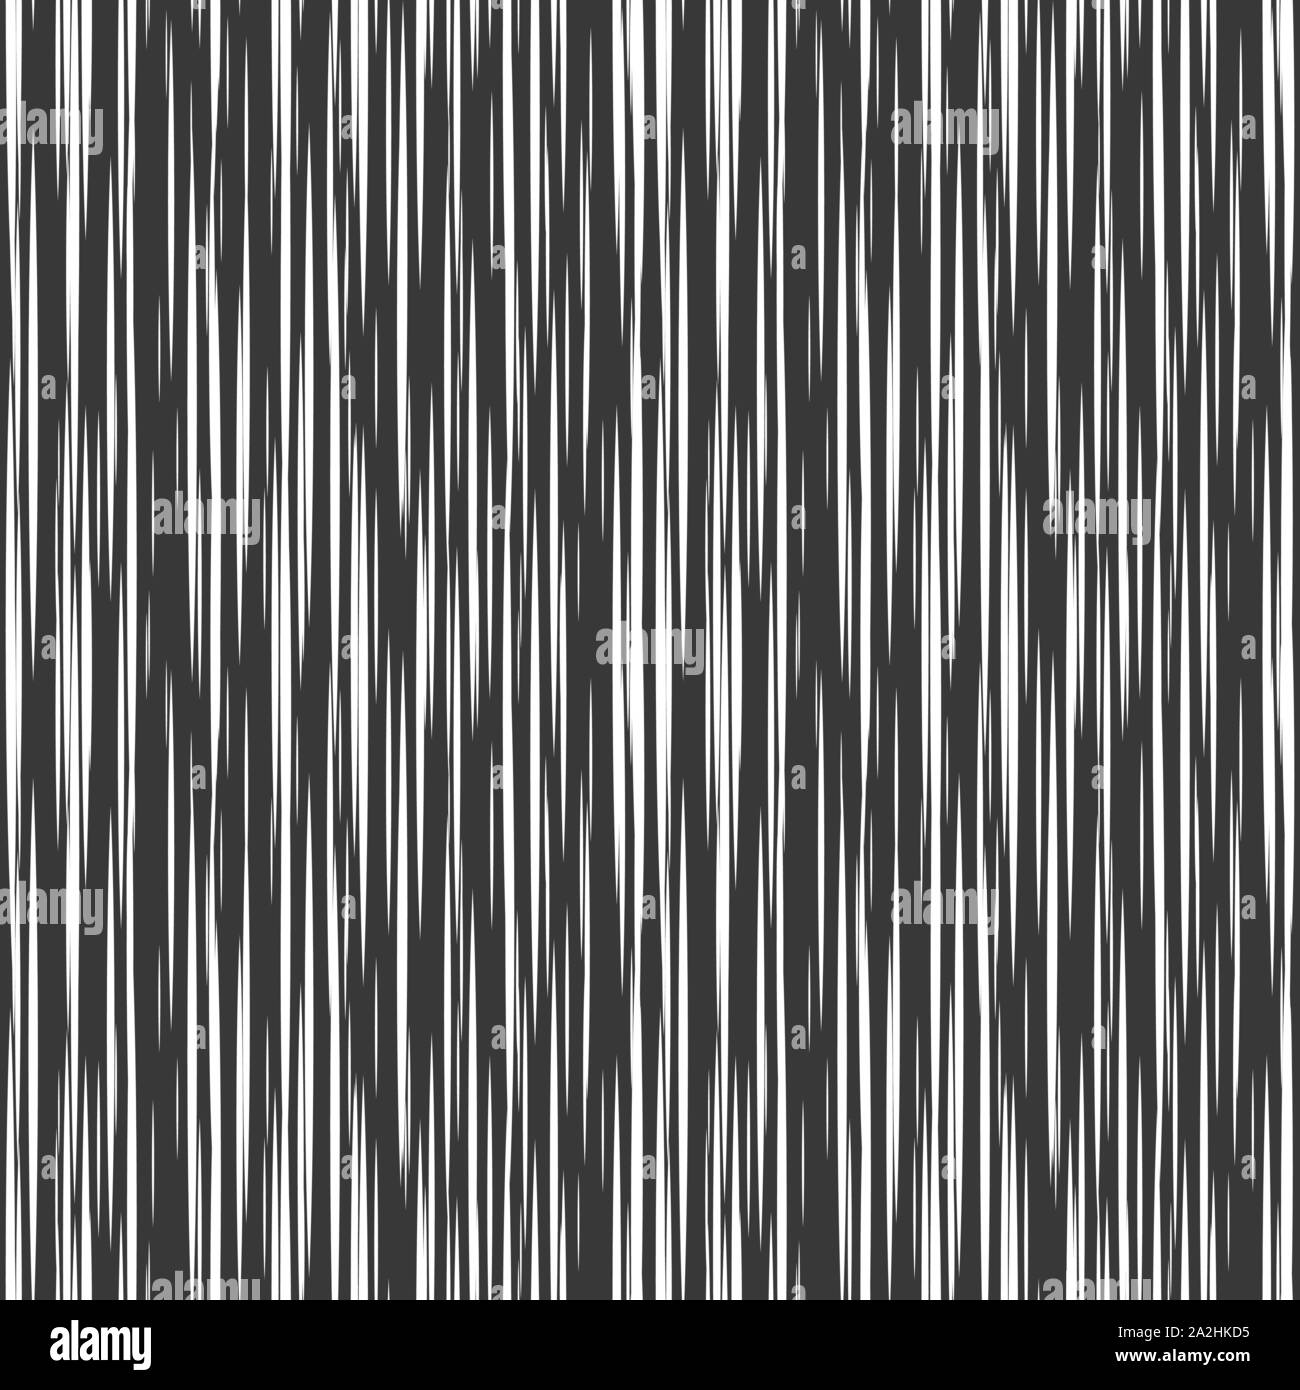 Striped seamless pattern with vertical line. Black and white fashion graphics design. Strict graphic background. Retro style. Template for wallpaper, wrapping, textile, fabric. Vector Illustration. Stock Vector